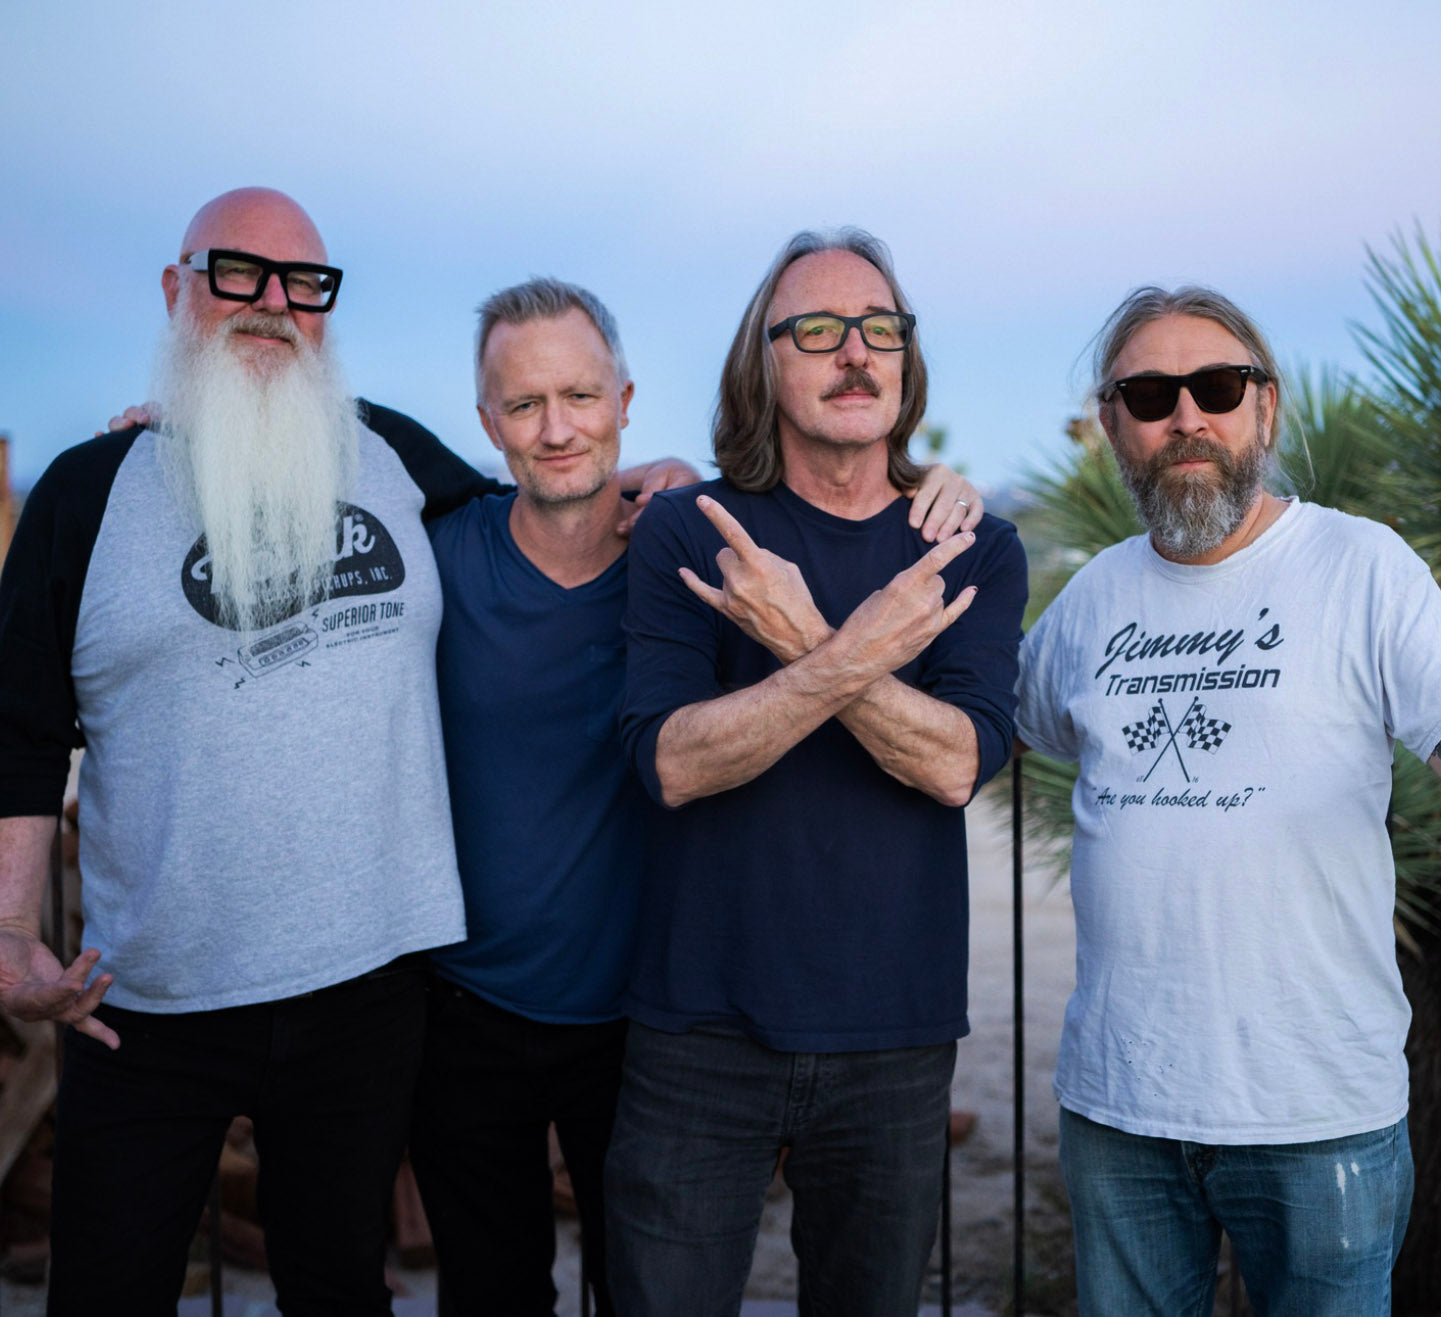 David Catching, Ryan Gruss, Butch Vig, and Bingo Richey standing together outside at dusk